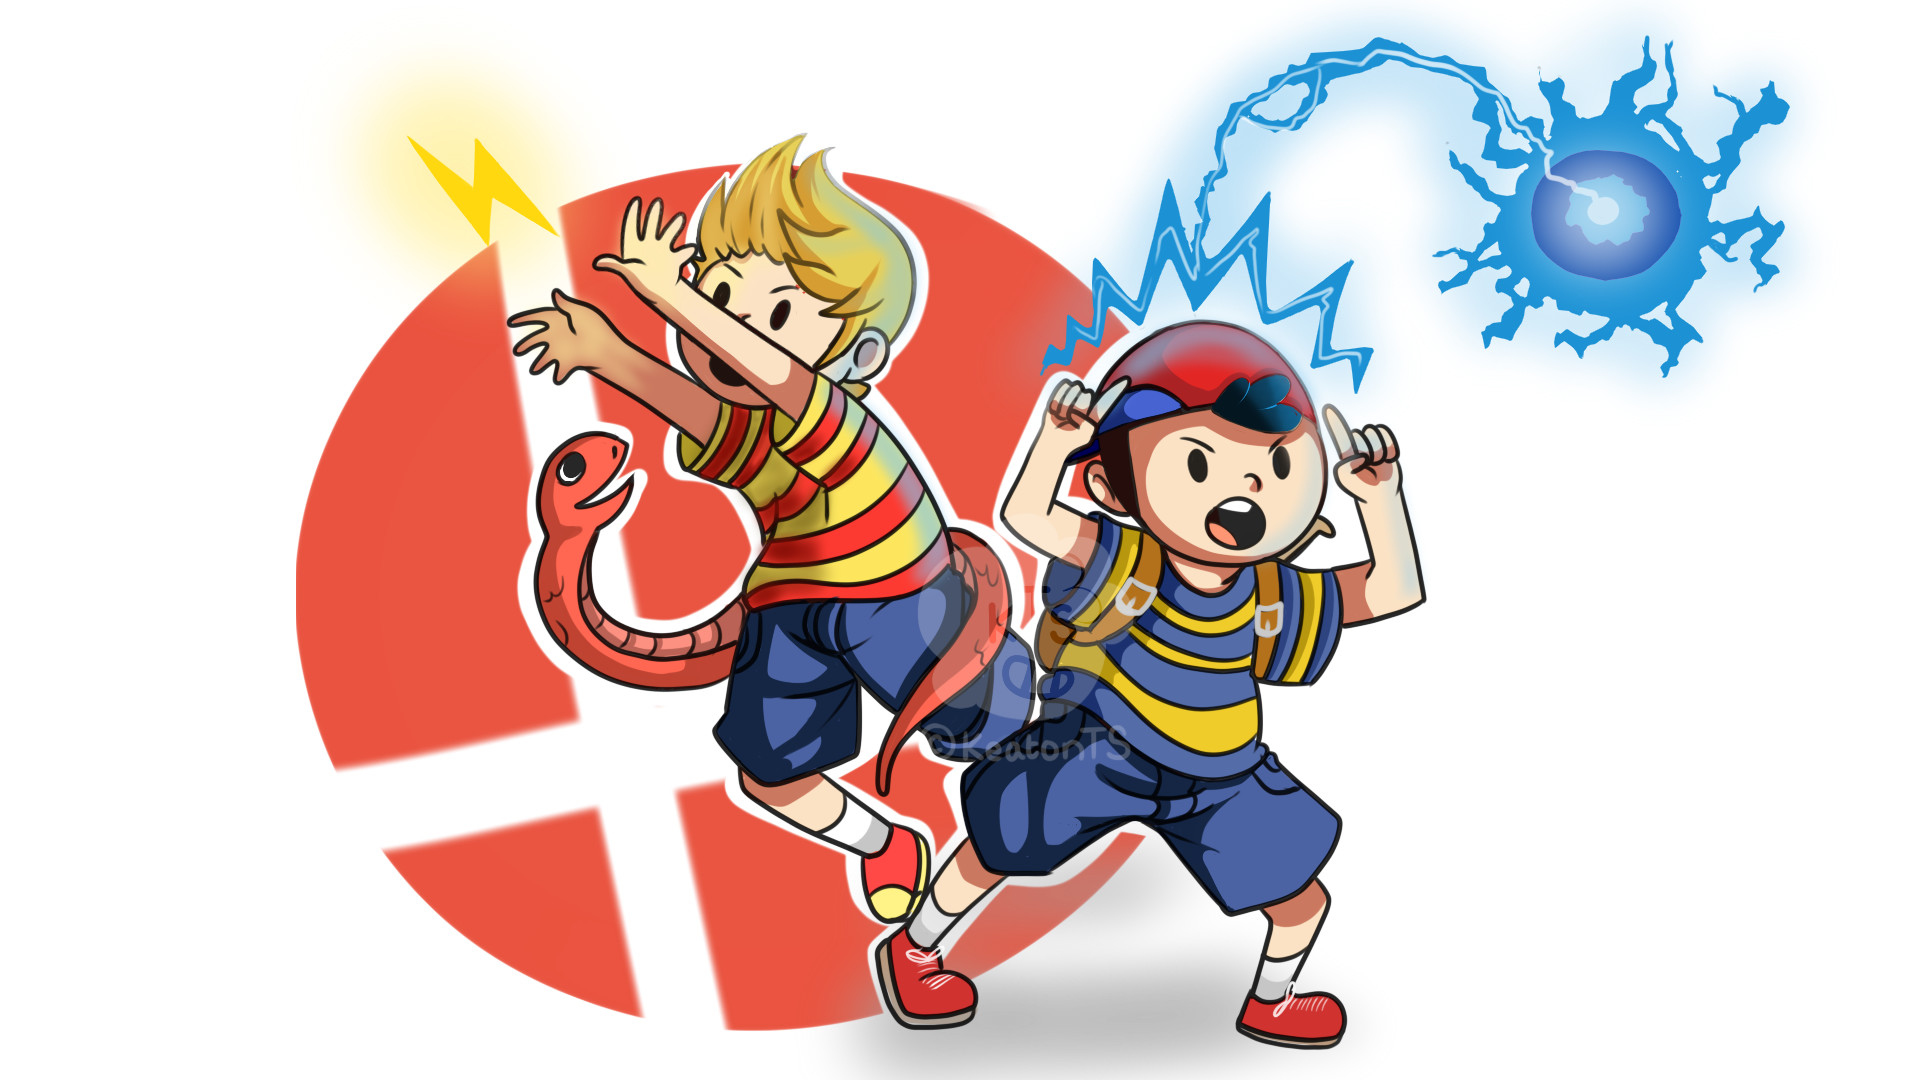 Ness and Lucas.